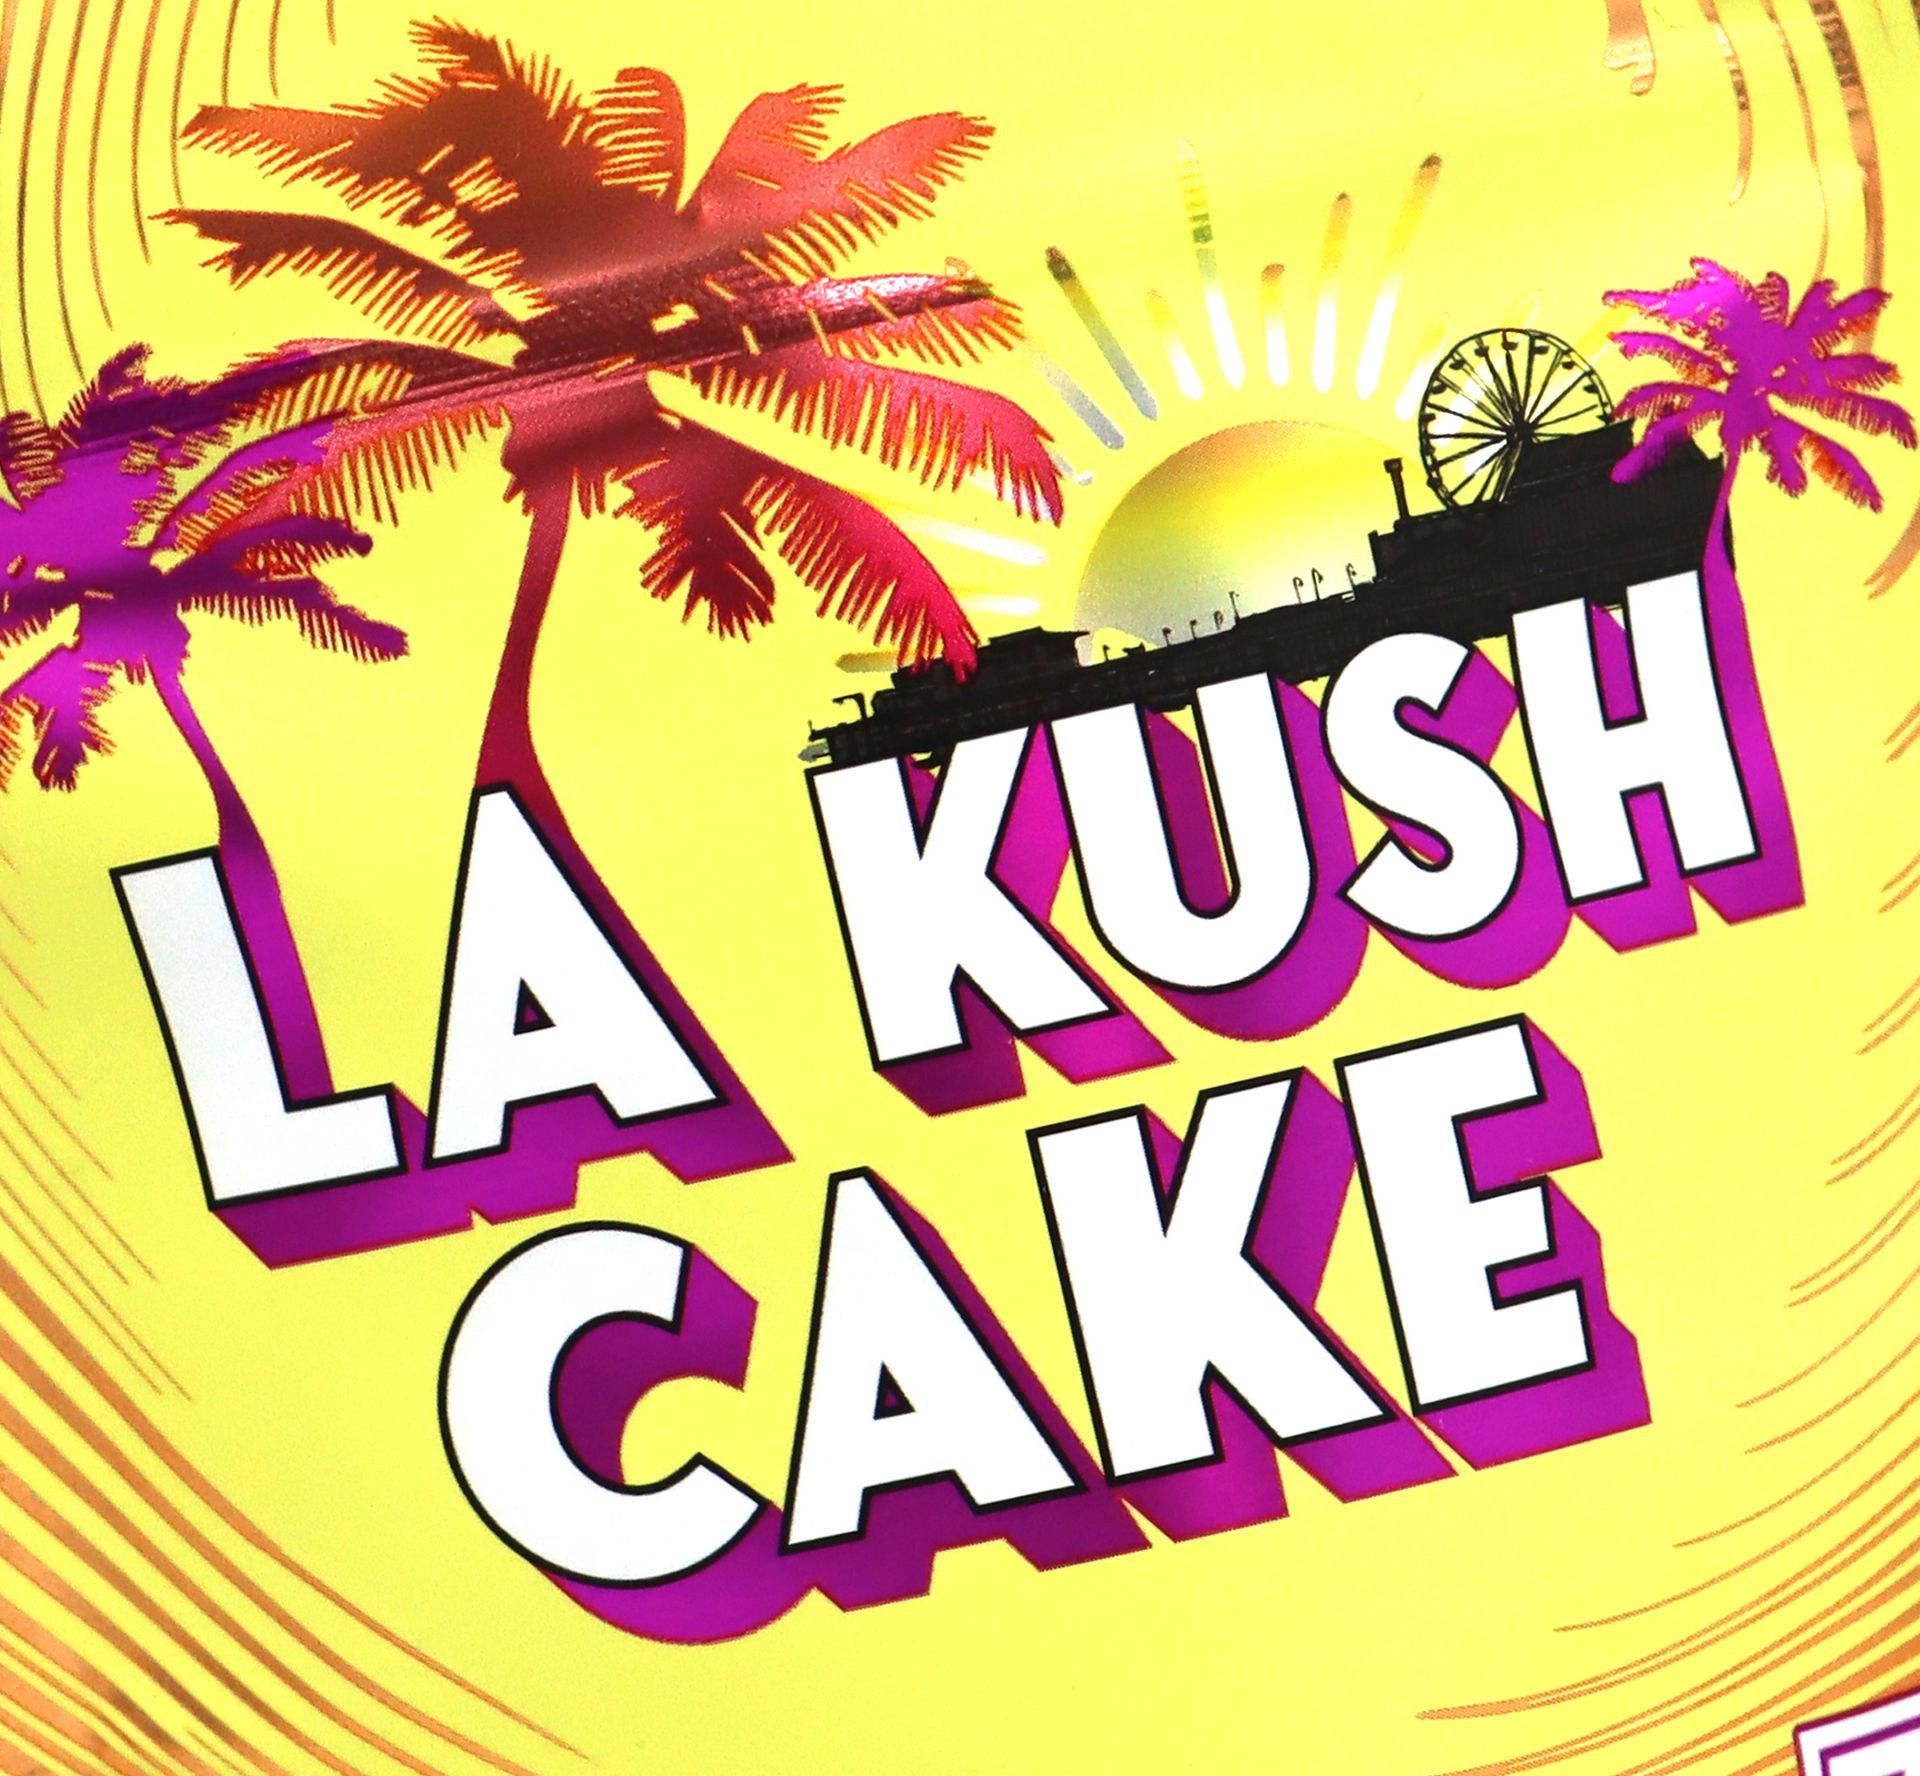 closeup of packaging graphic for la kush cake